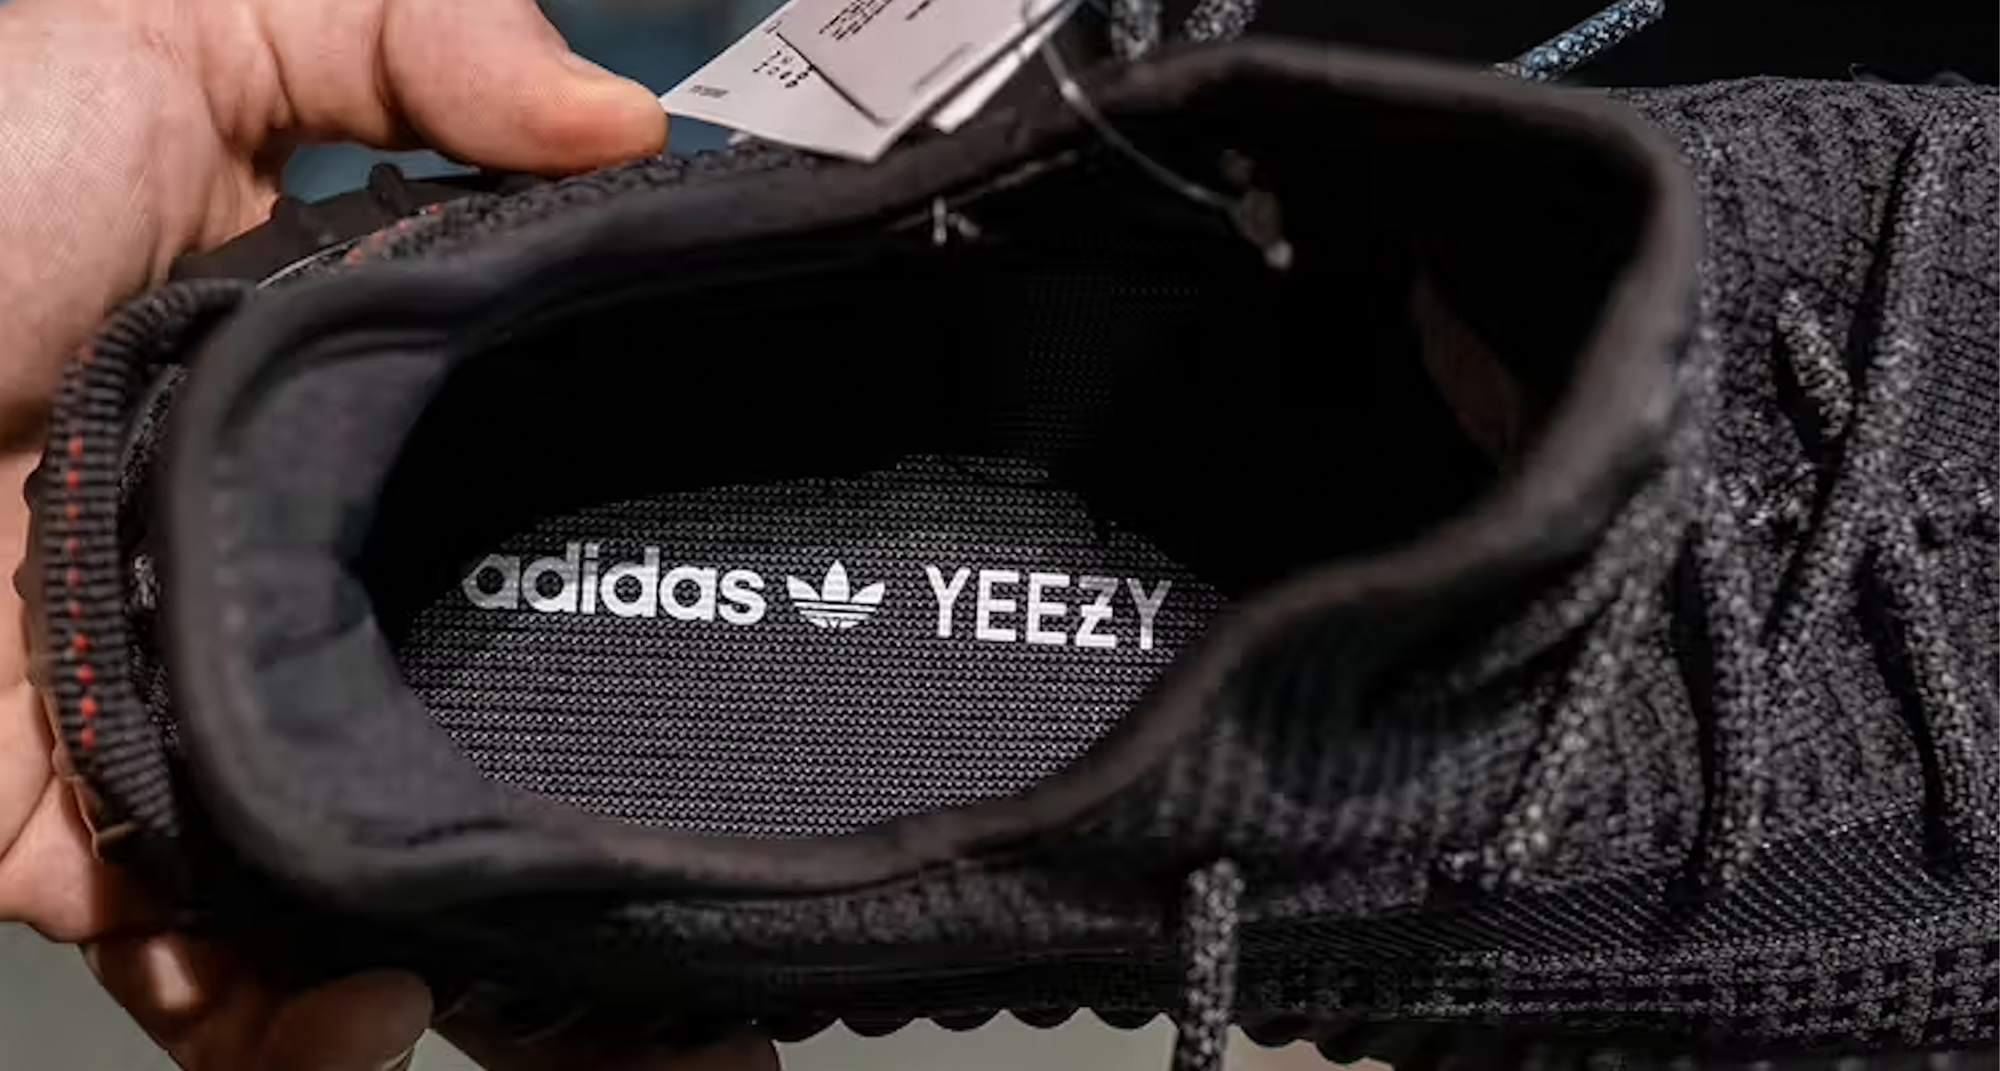 Has adidas Struck a New Deal With Ye?